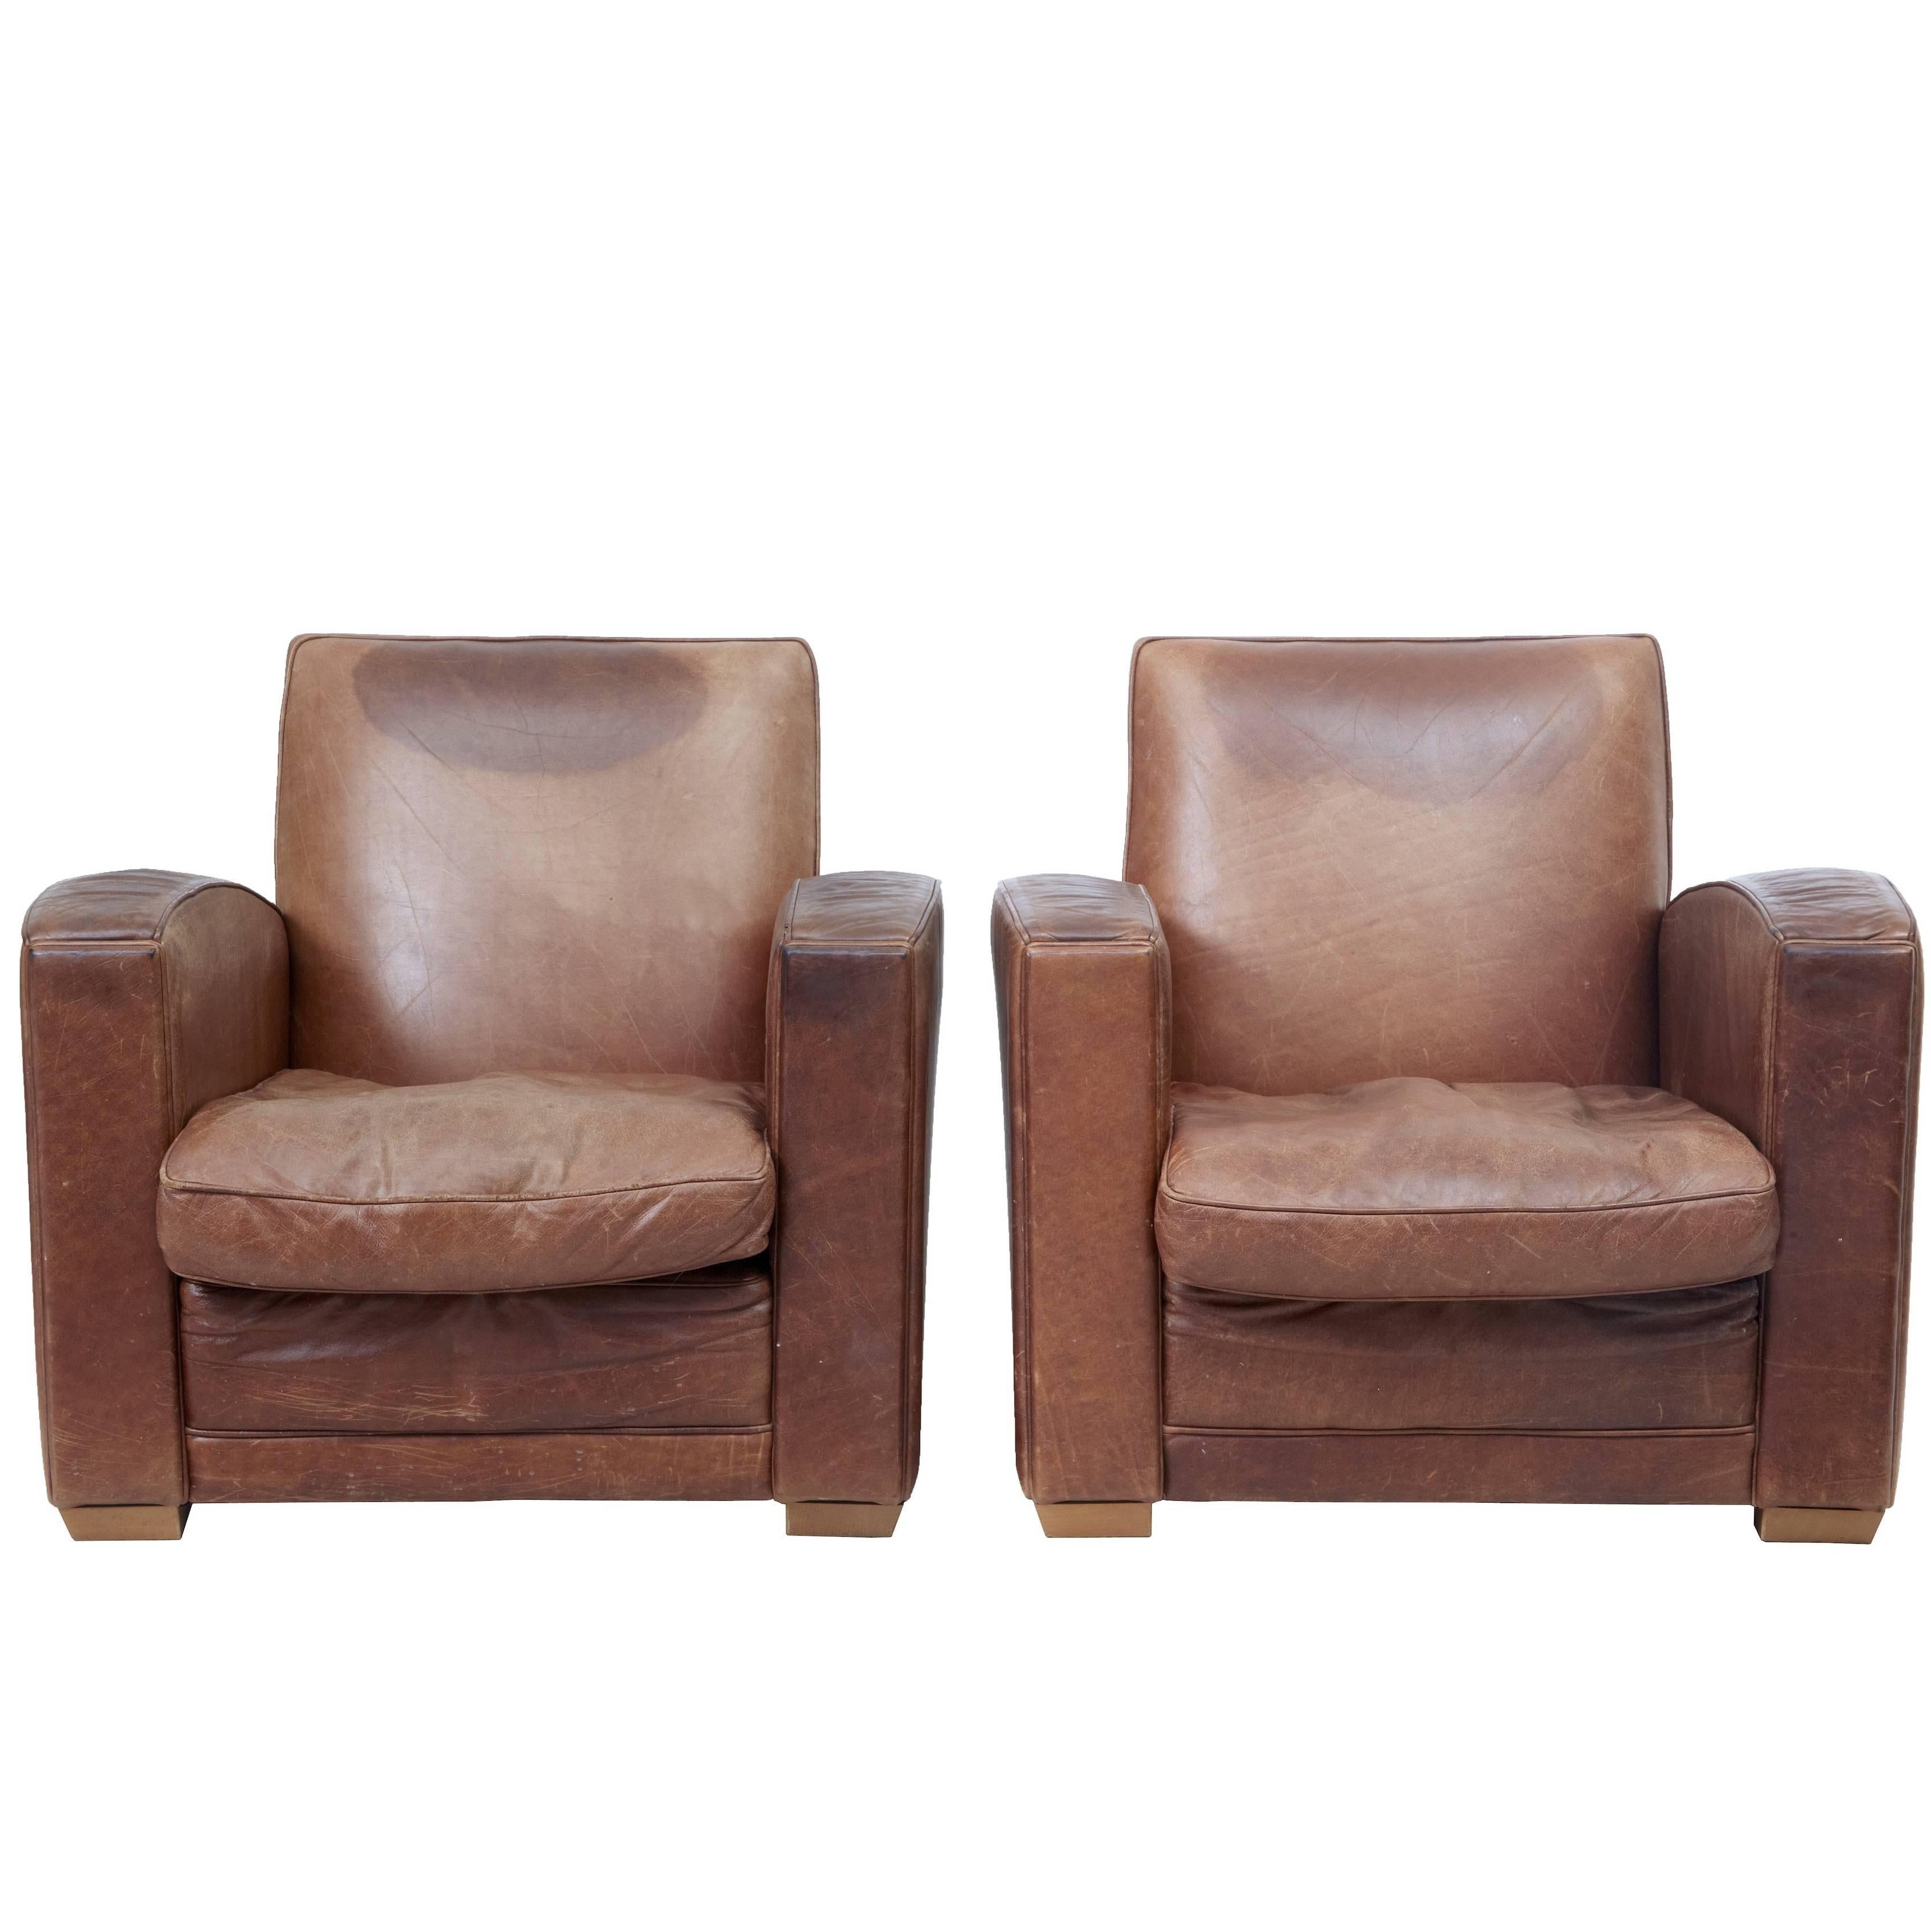 Pair of 1960s Art Deco Design Leather Armchairs